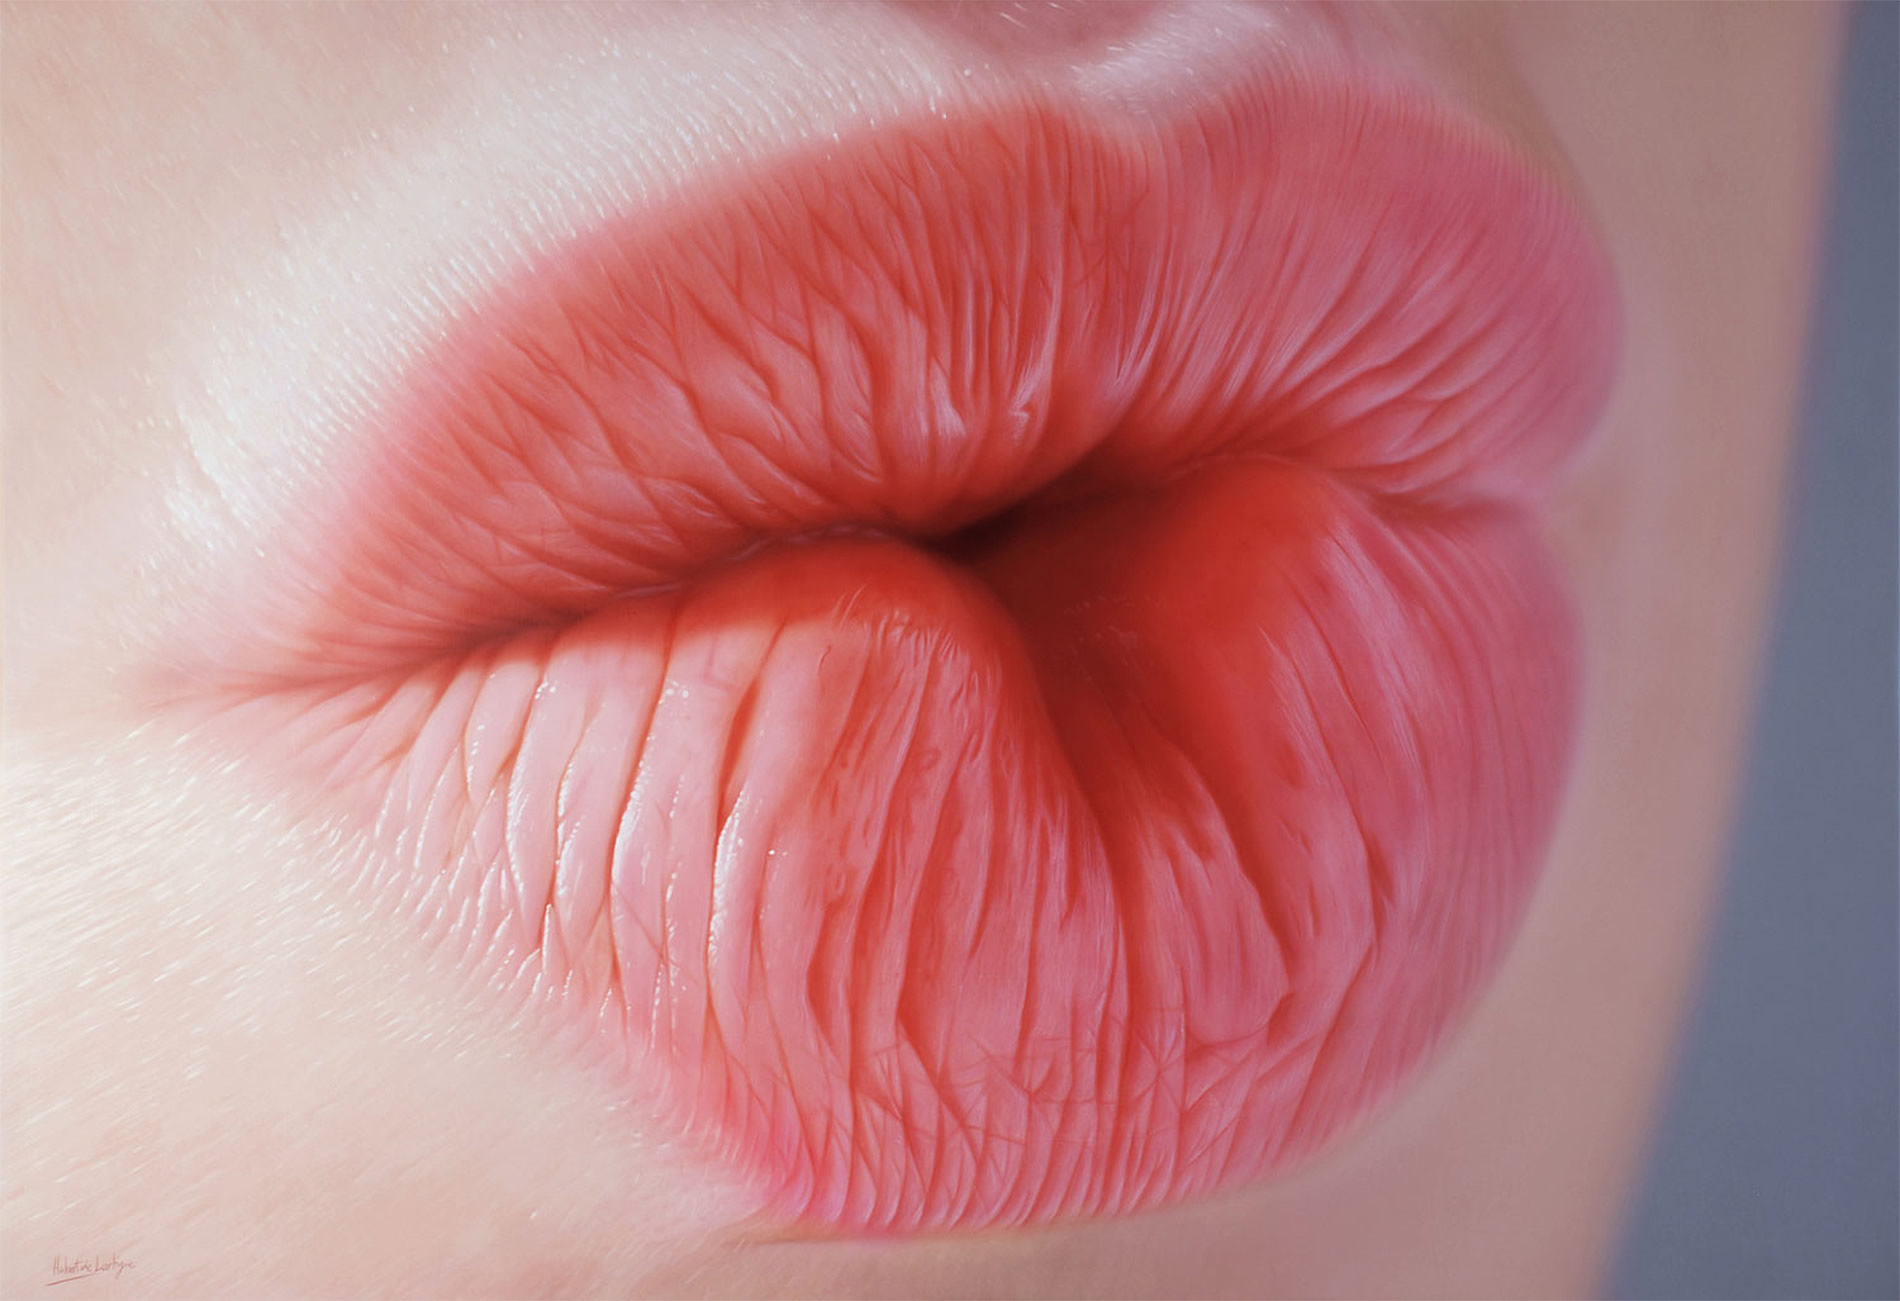 These Hyperrealistic Paintings Of Lips Are So Erotic They Should Be NSFW